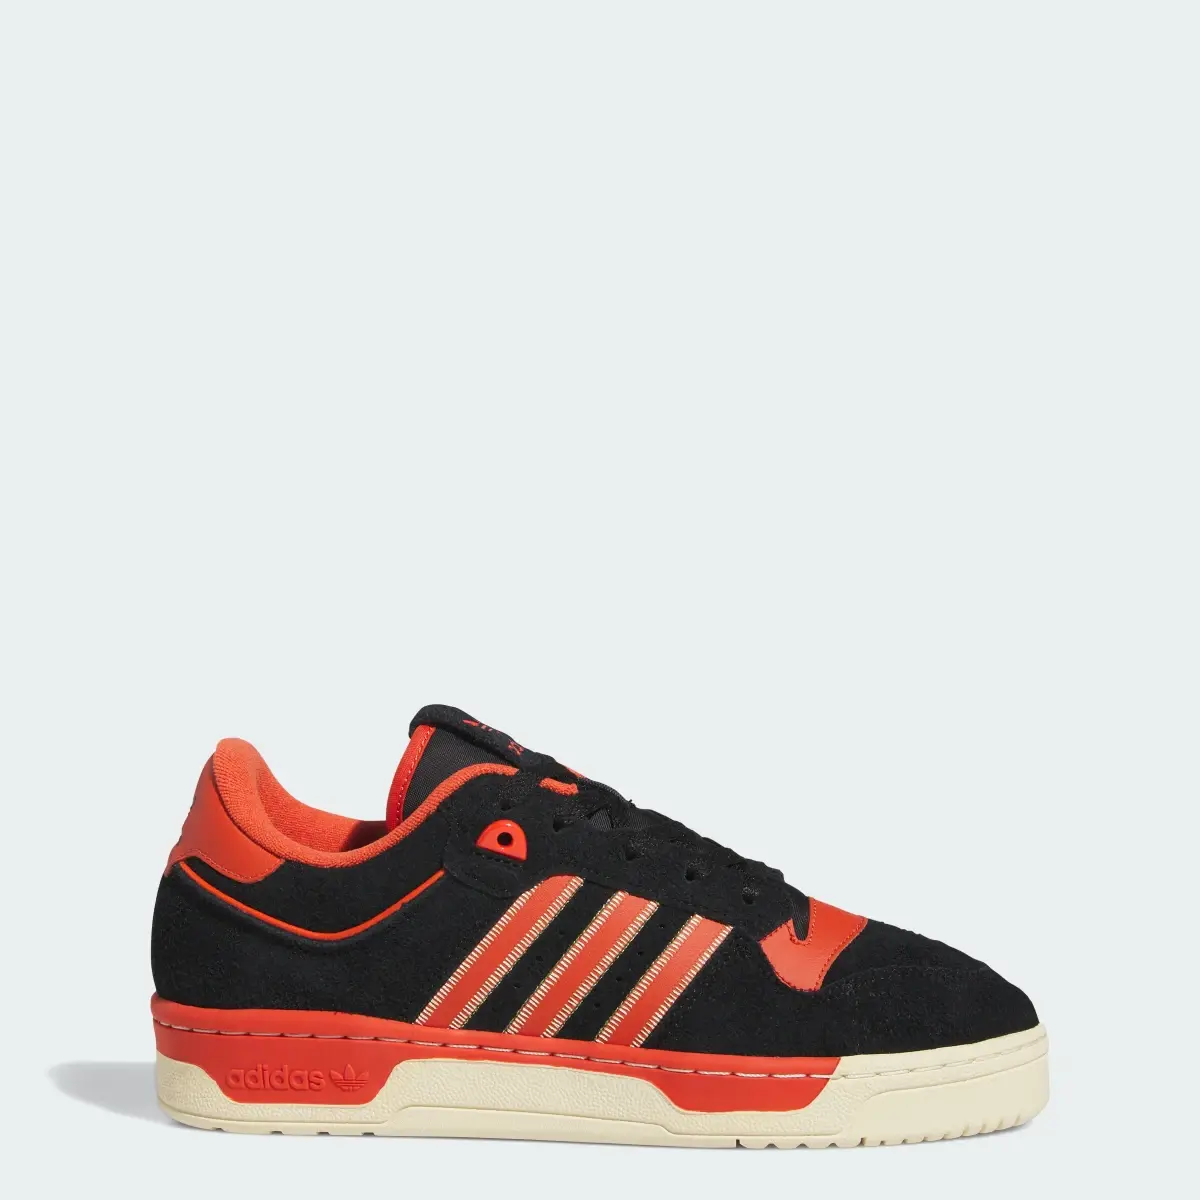 Adidas Rivalry 86 Low Schuh. 1